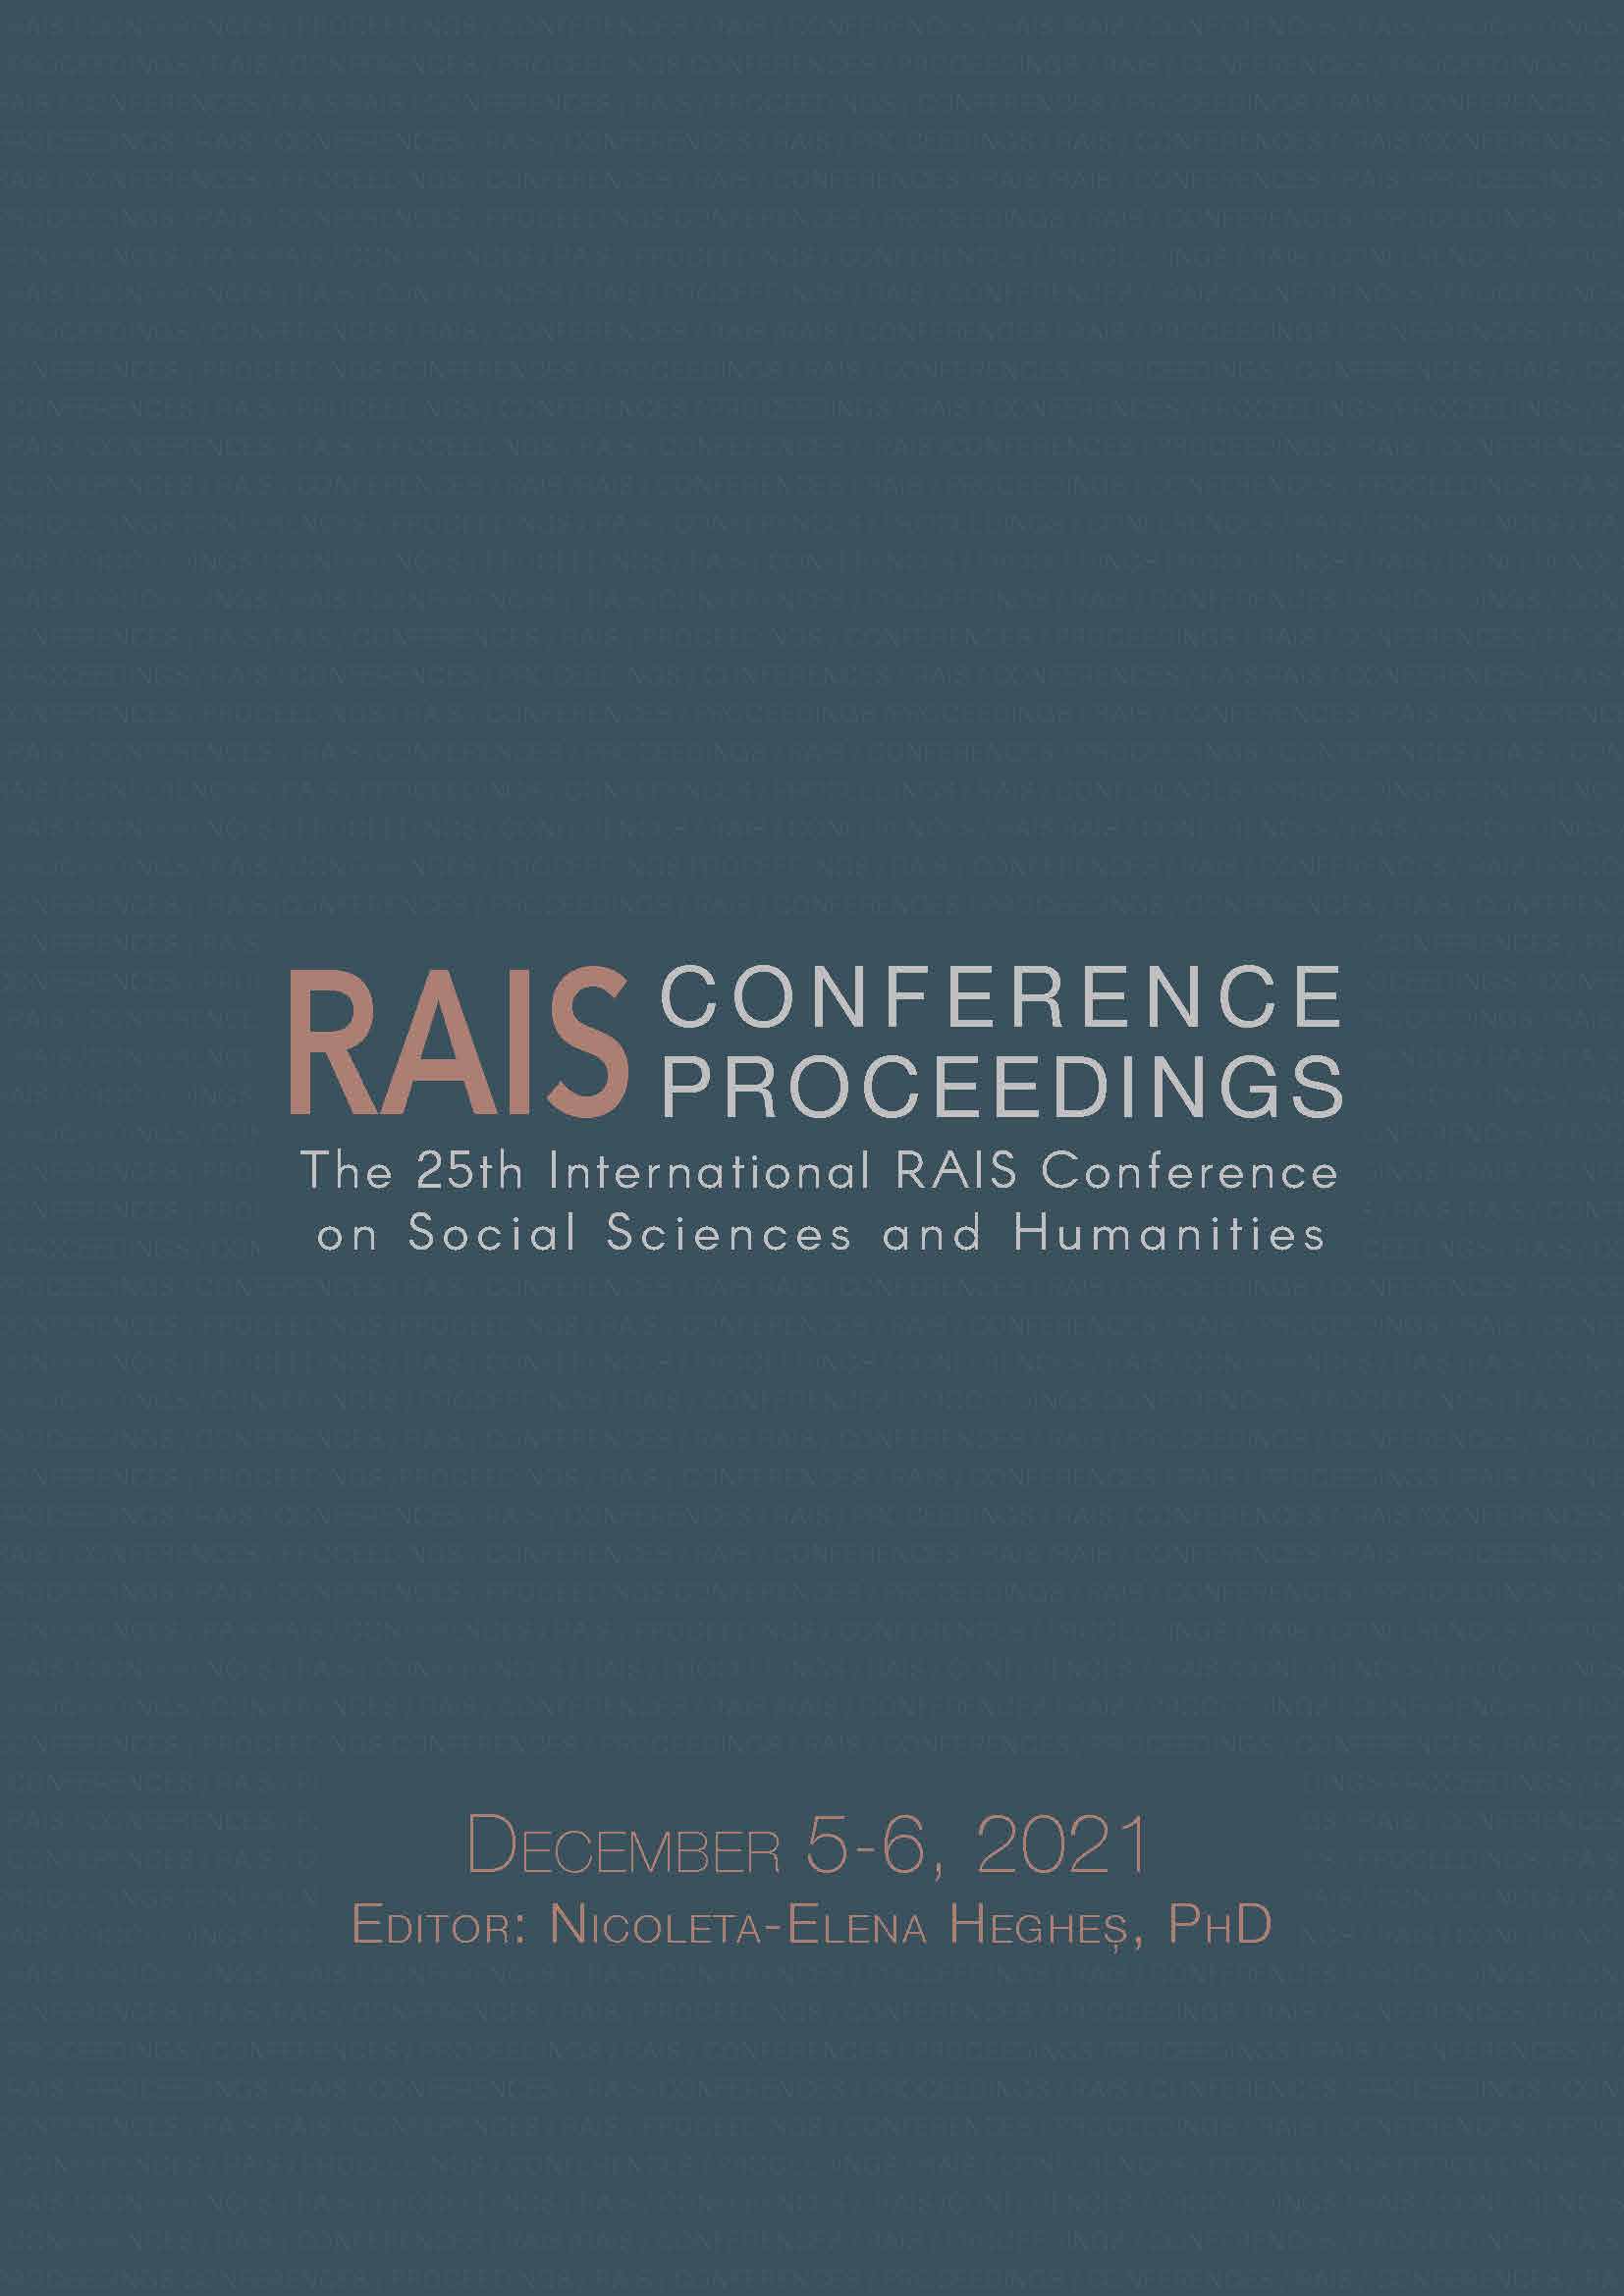 Proceedings of the 25th International RAIS Conference on Social Sciences and Humanities